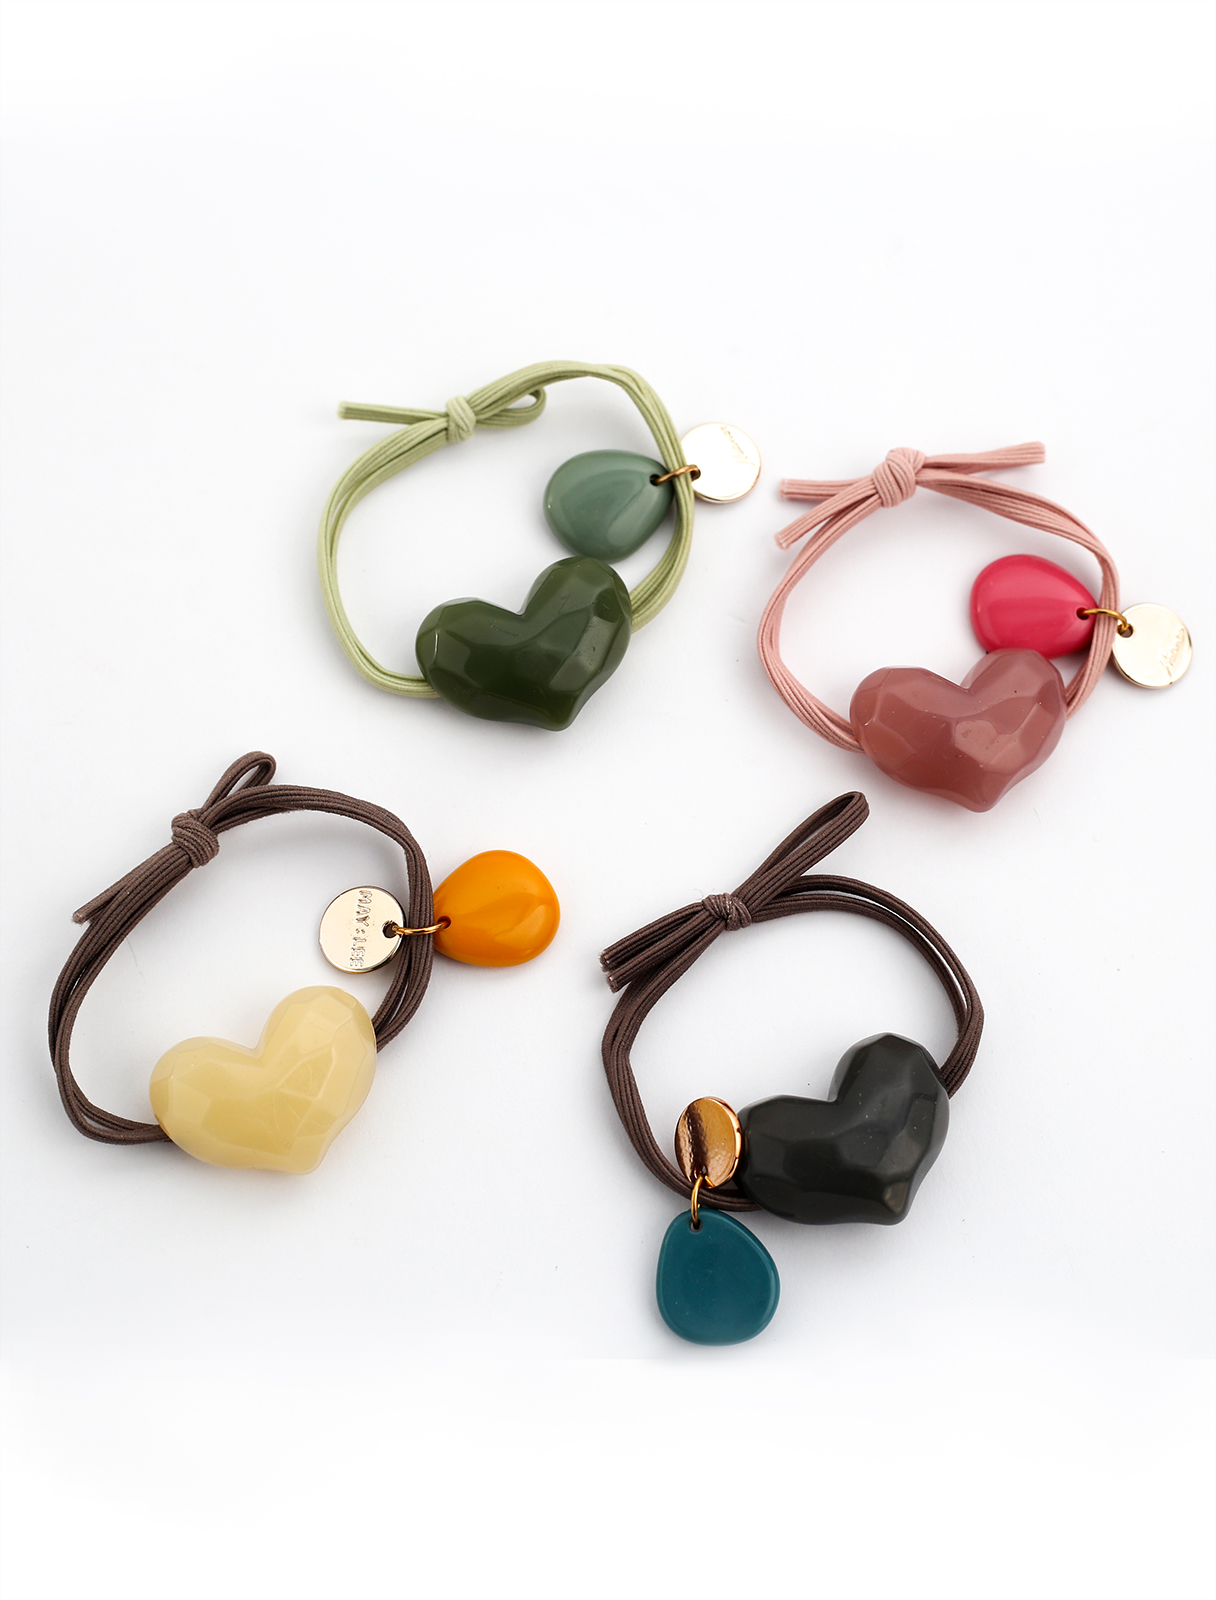 Color hair tie in the shape of a heart of natural stone